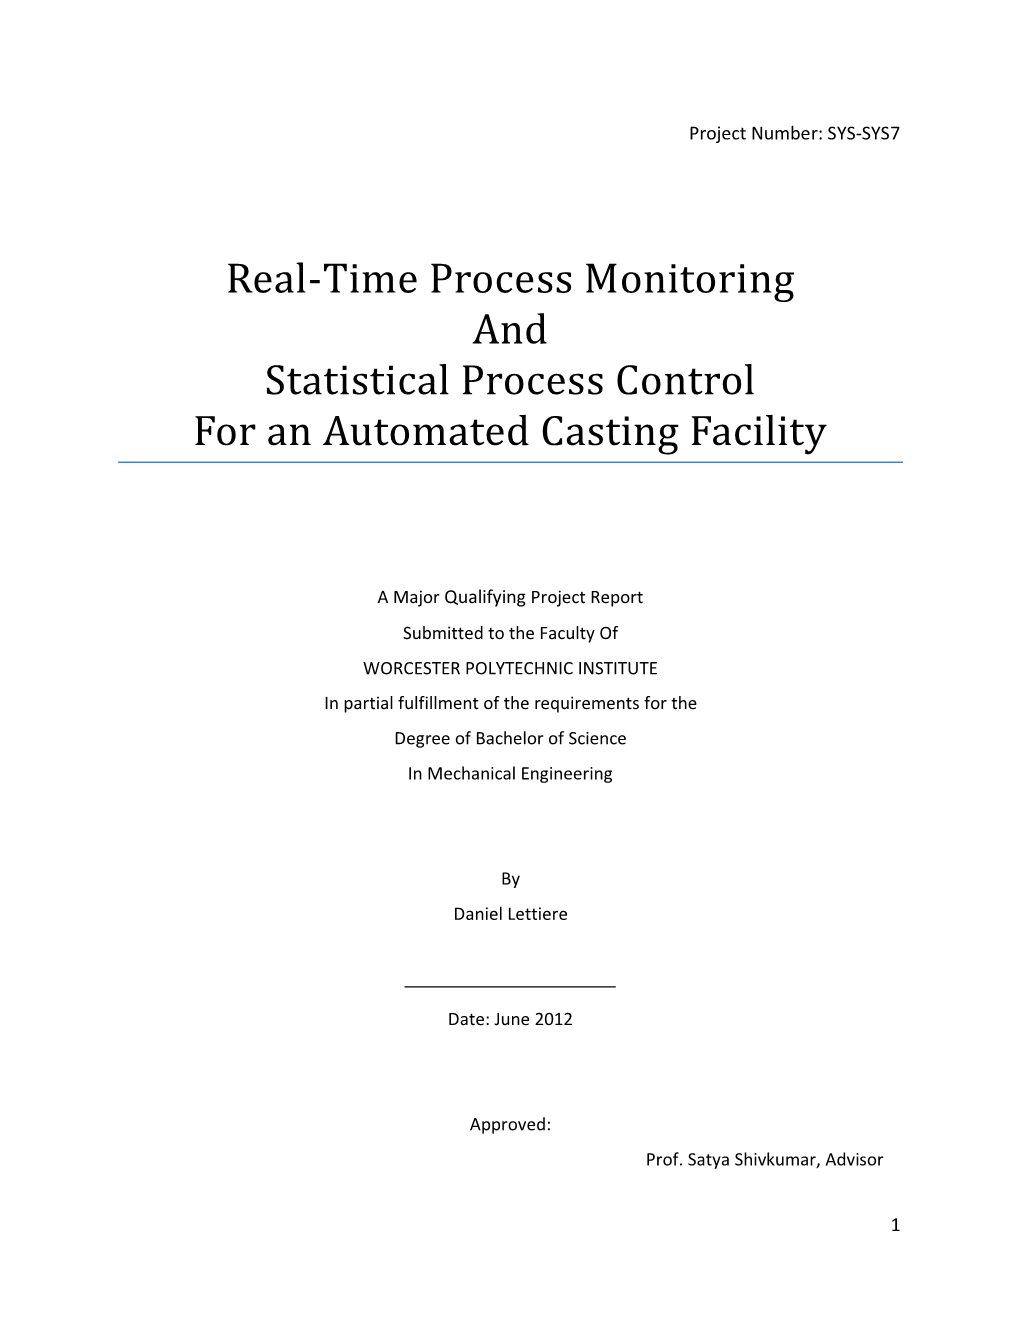 Real-Time Process Monitoring and Statistical Process Control for an Automated Casting Facility